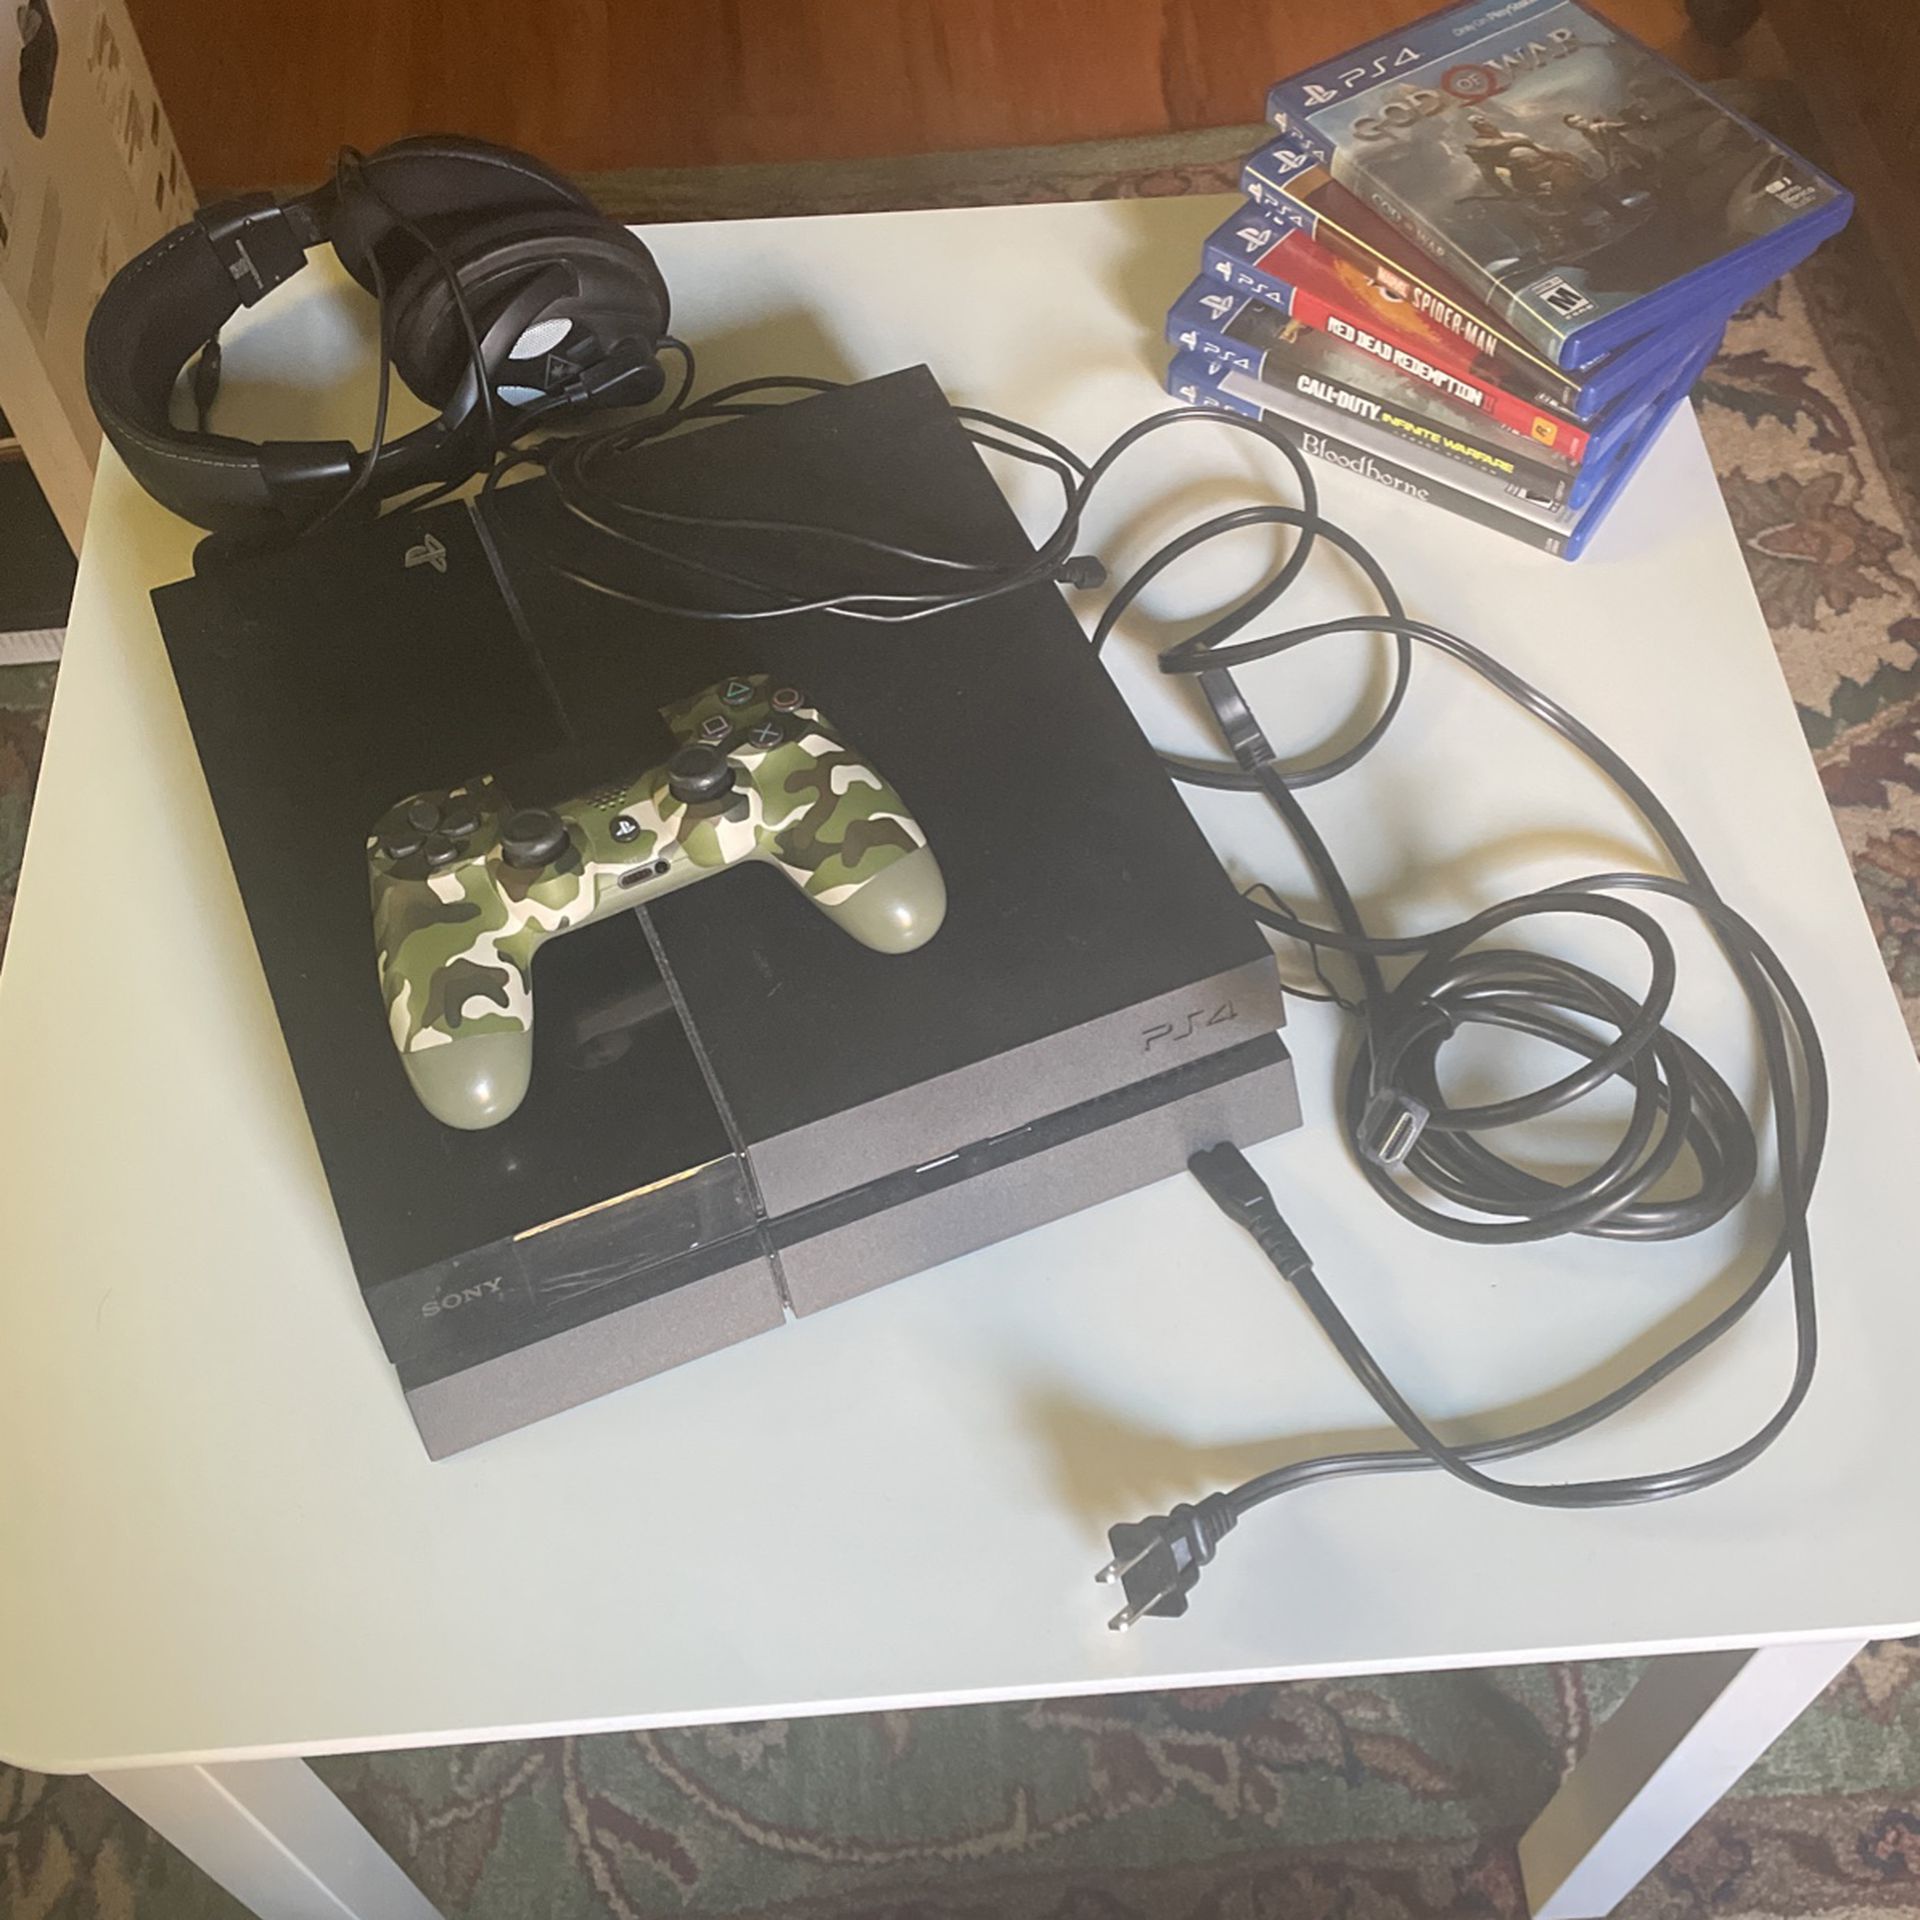 PS4 Console With Controller, Headset And Games 